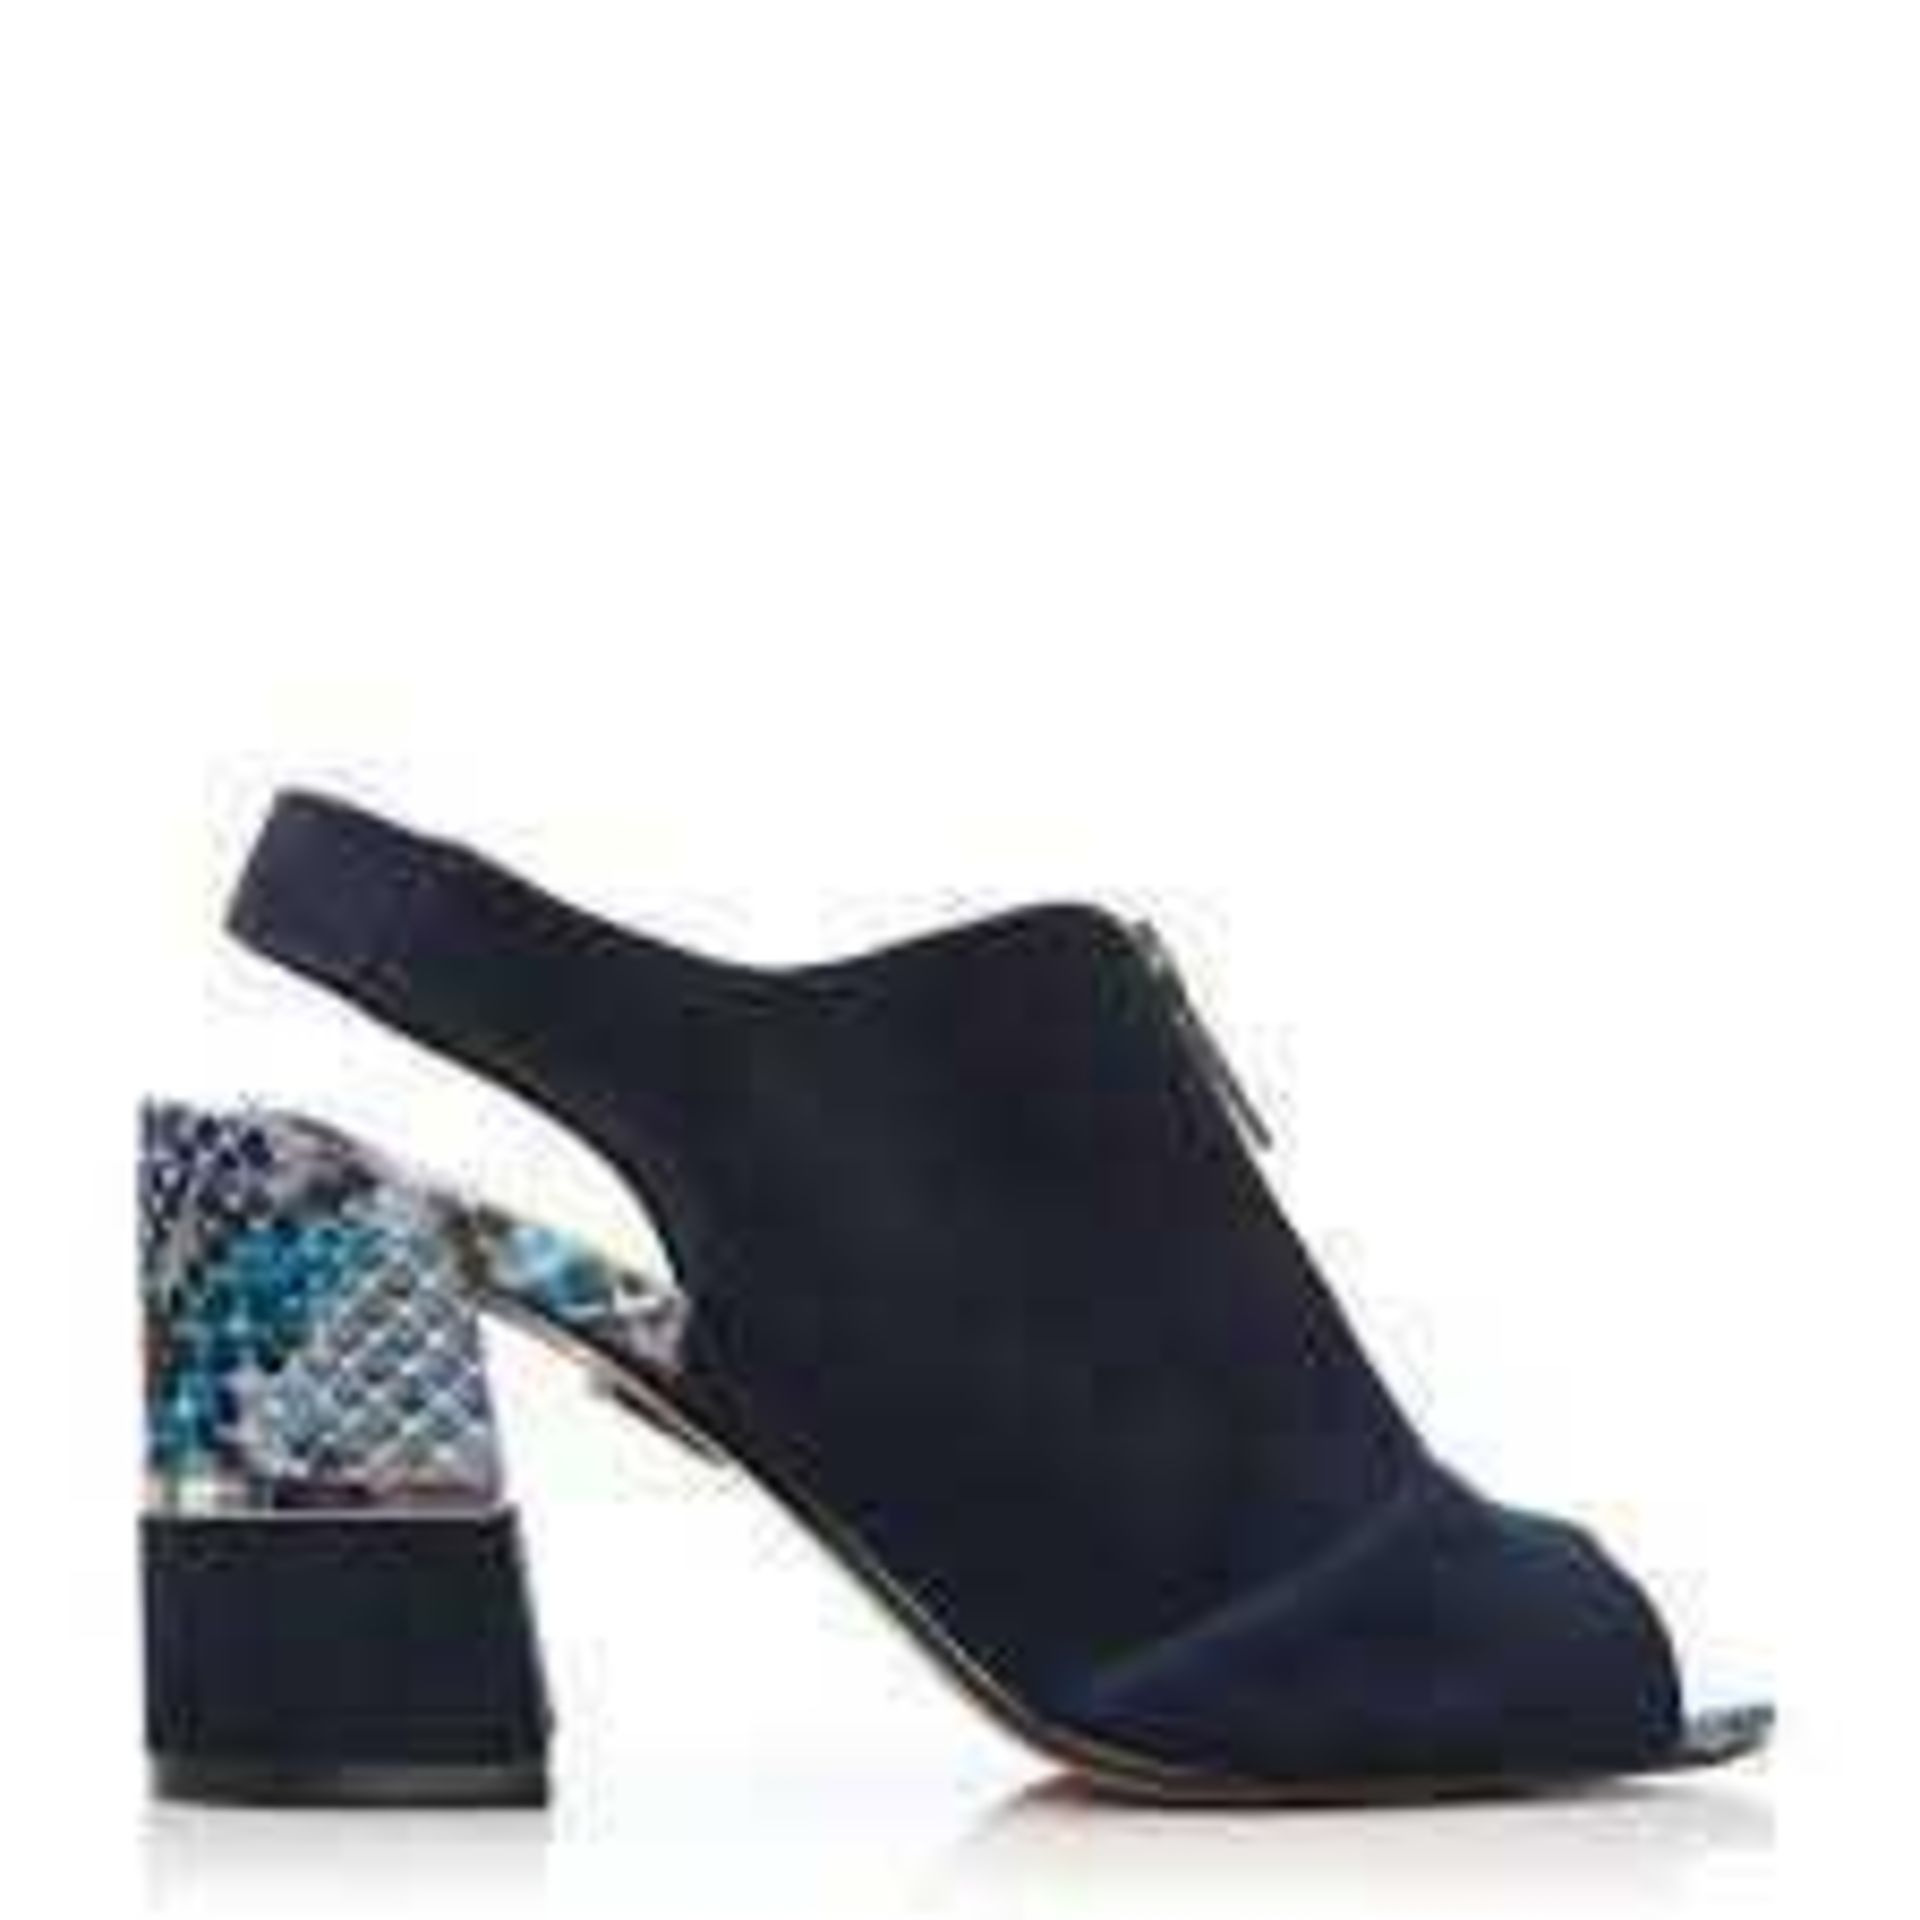 RRP £210 Lot To Contain 2 Boxed Pairs Of Moda In Pelle Size 41 Loelia Navy Suede Zip Front Block Hee